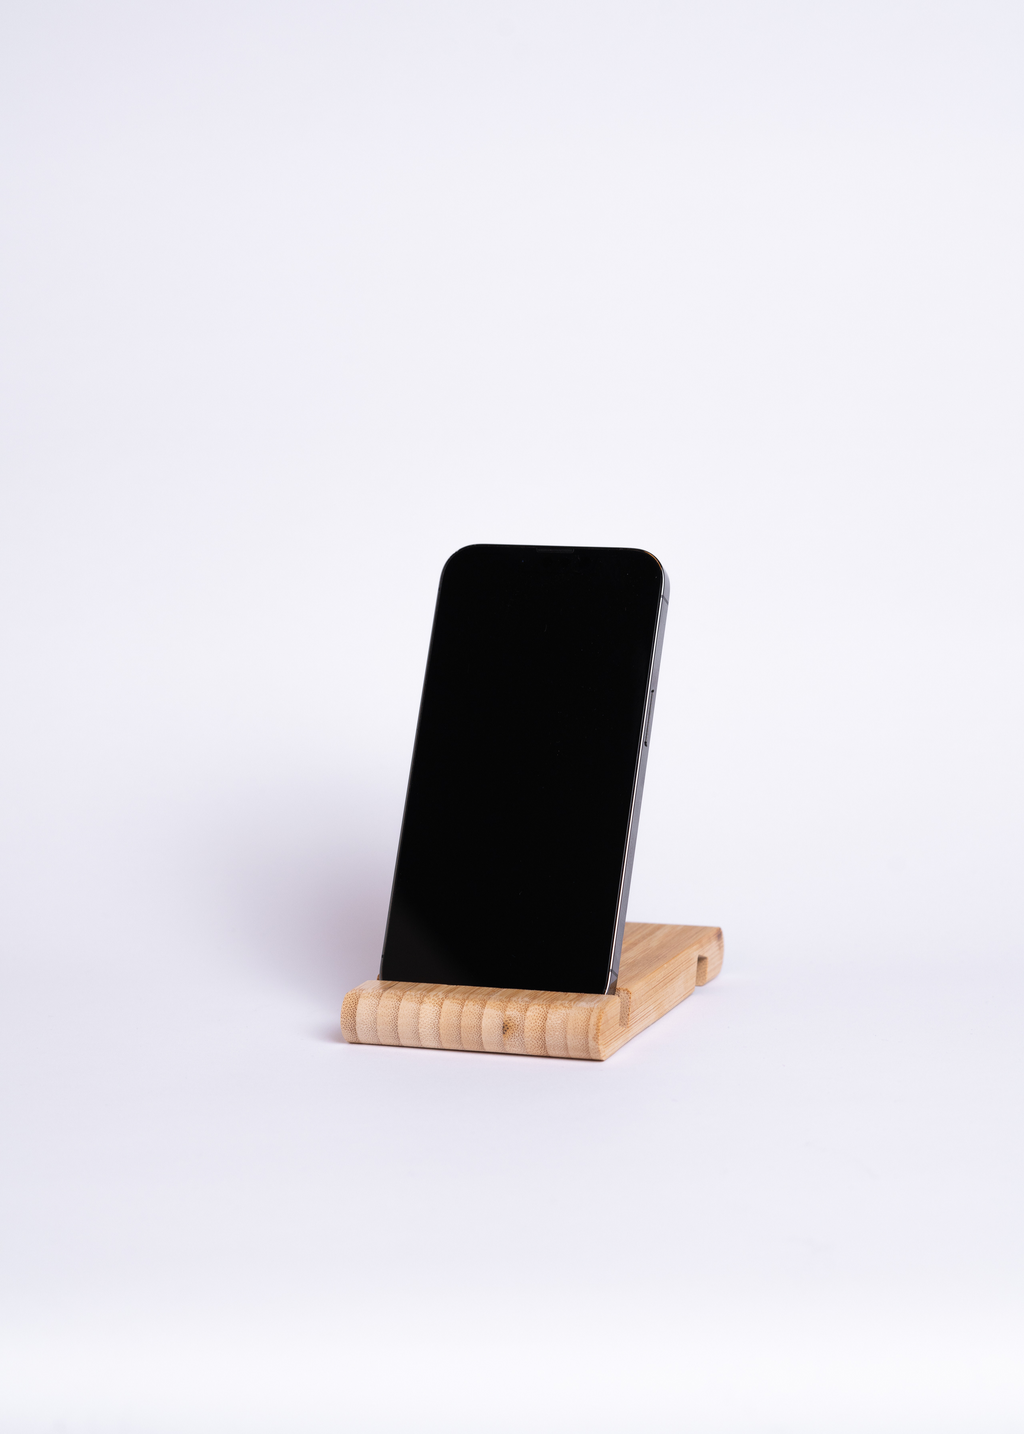 Stand for phone or tablet